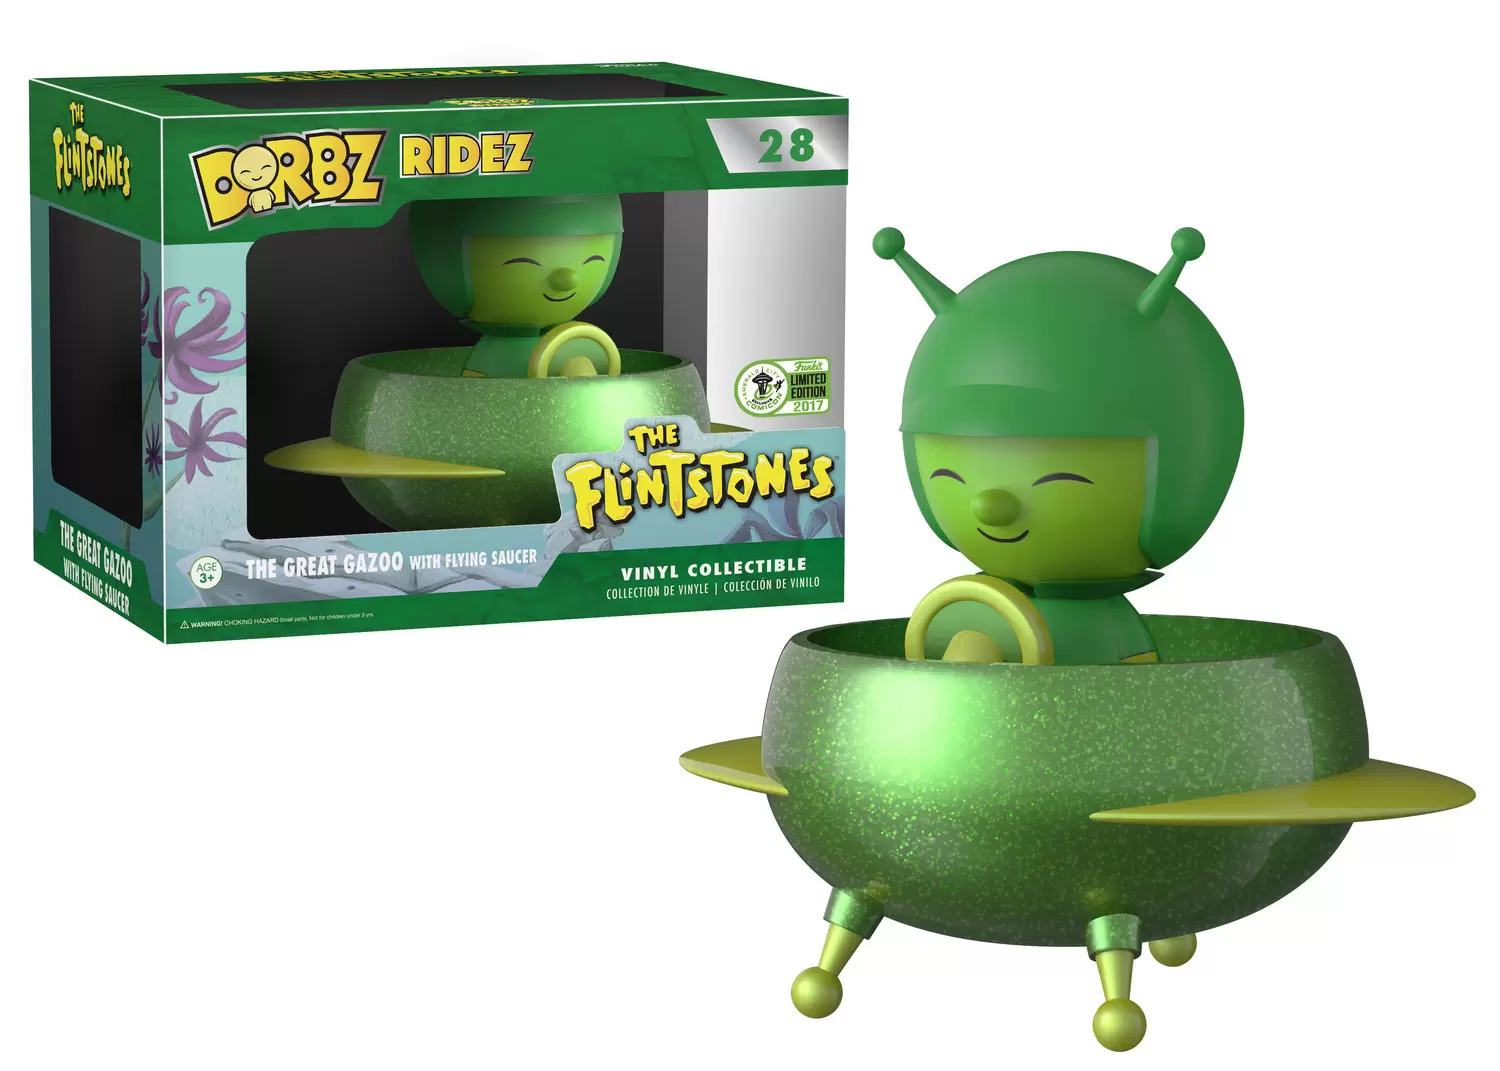 Dorbz Ridez - The Great Gazoo with Flying Saucer